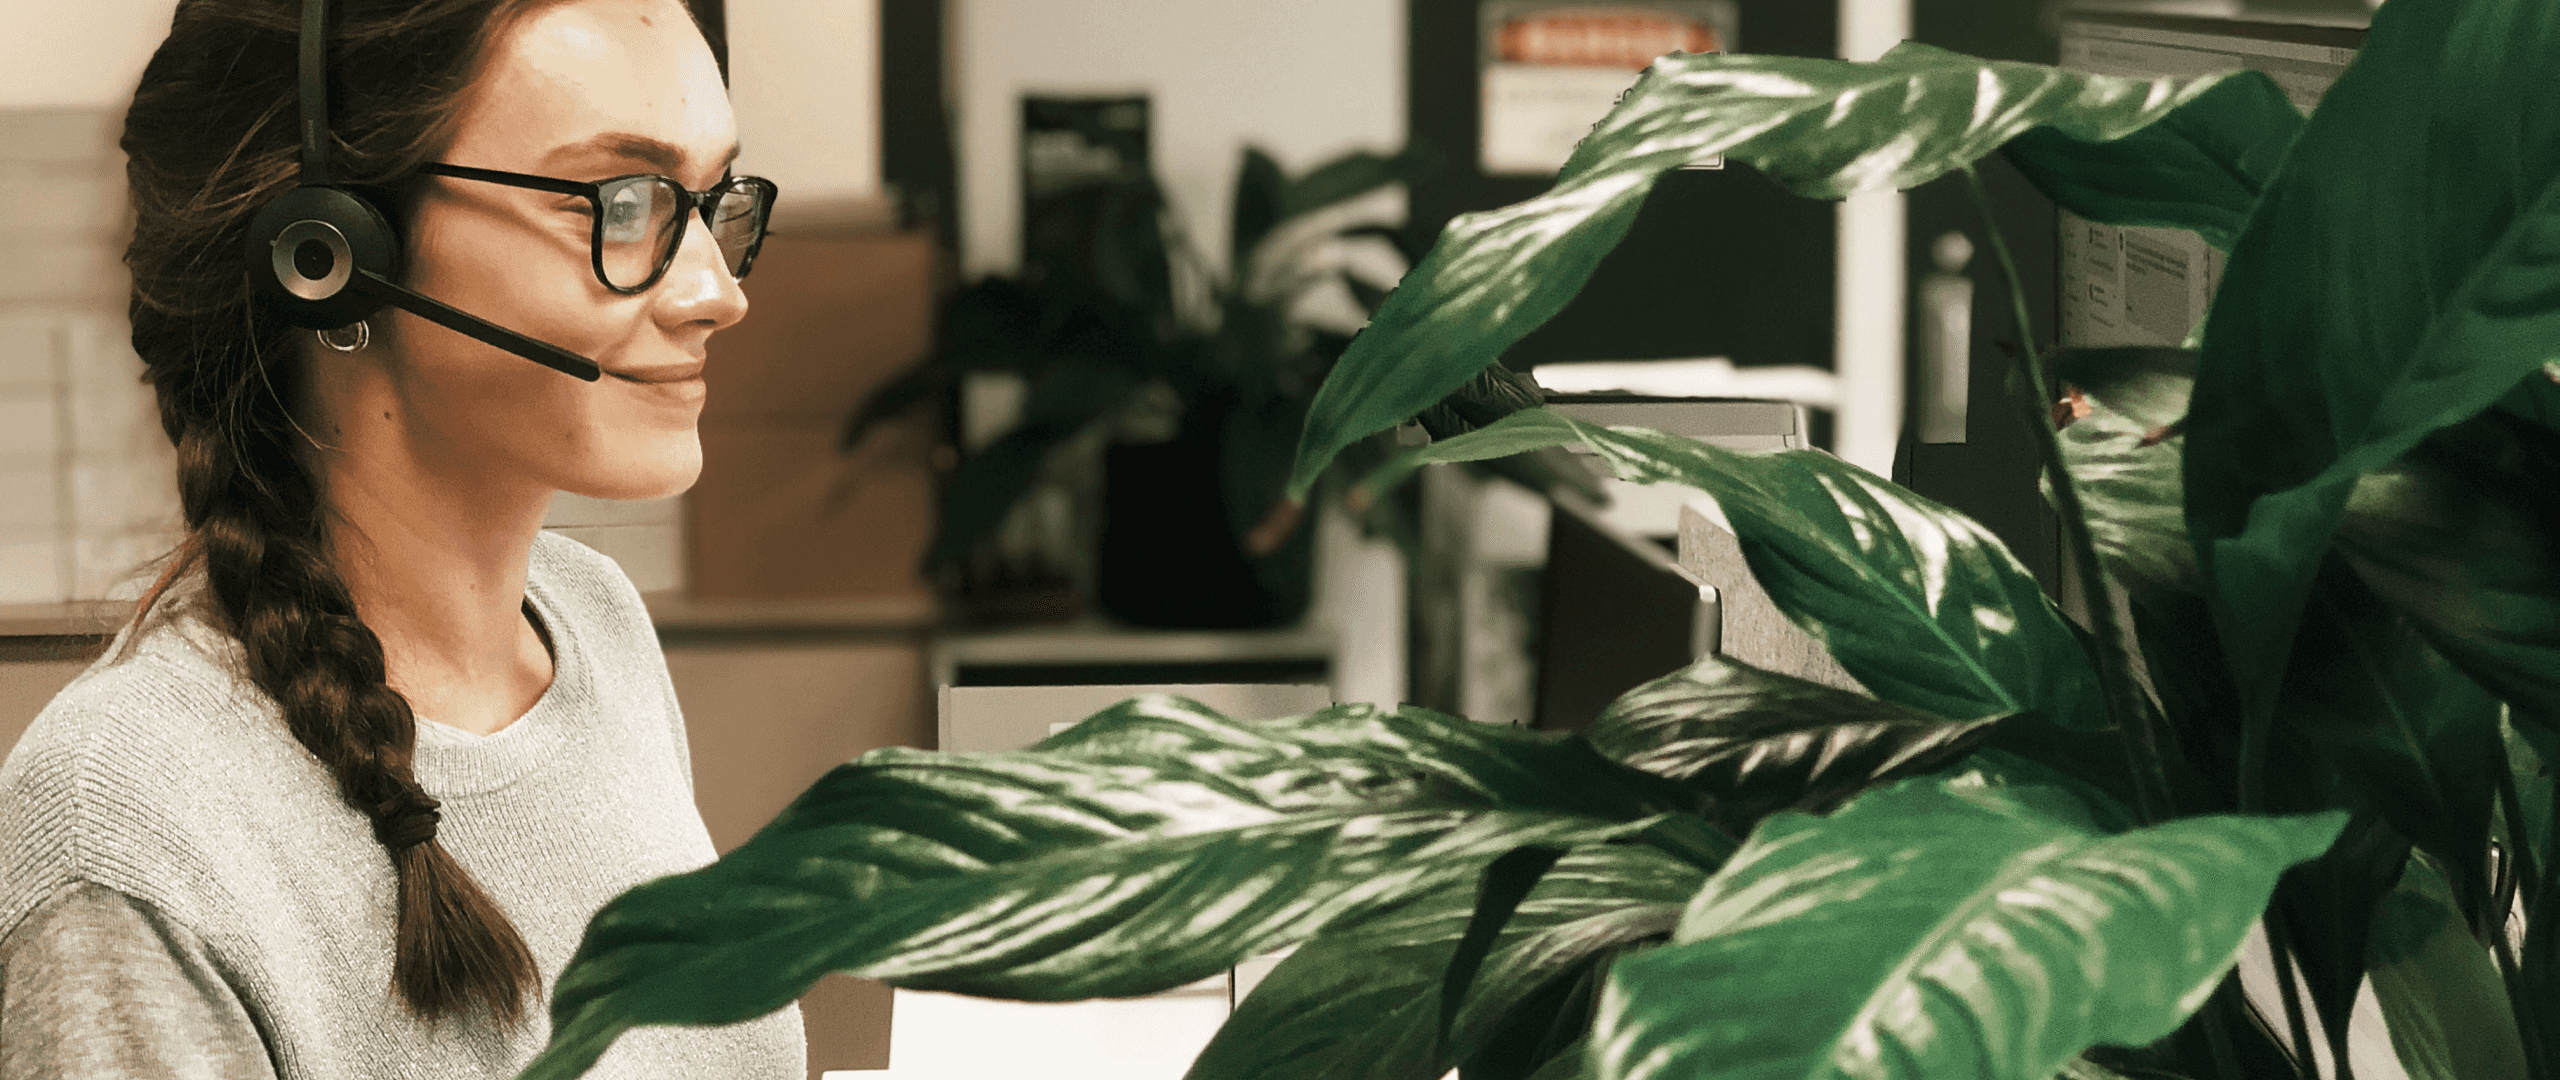 A receptionist sits at a desk adorned with green tropical plants